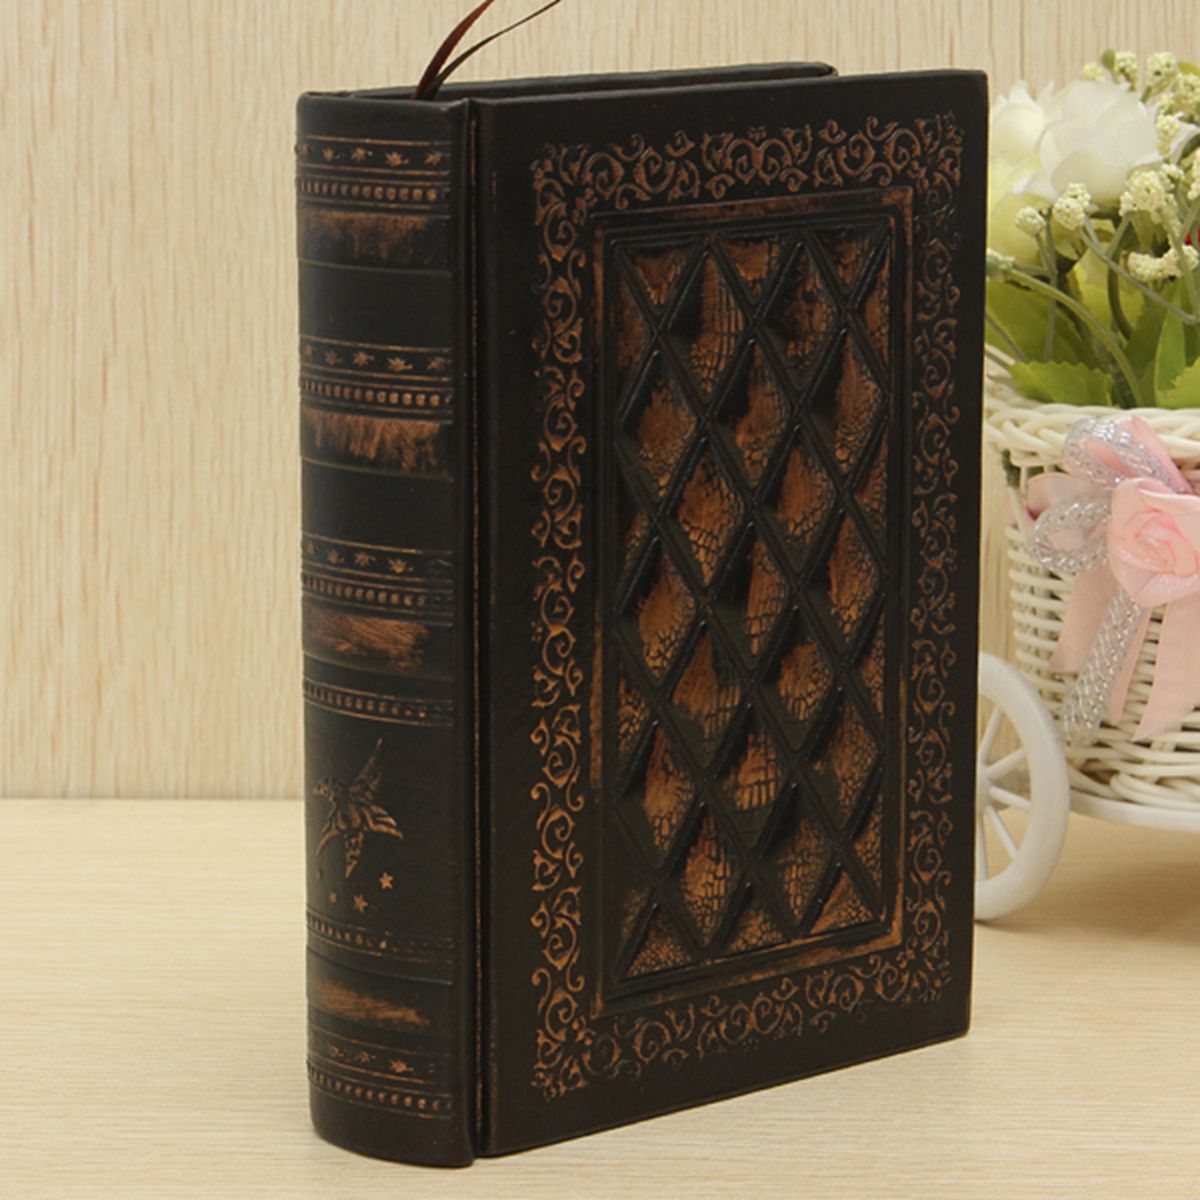 Vintage Classic Black Golden Plaid Notebook Diary Creative School Office Supplies Stationery Personal Diary Supplies—9